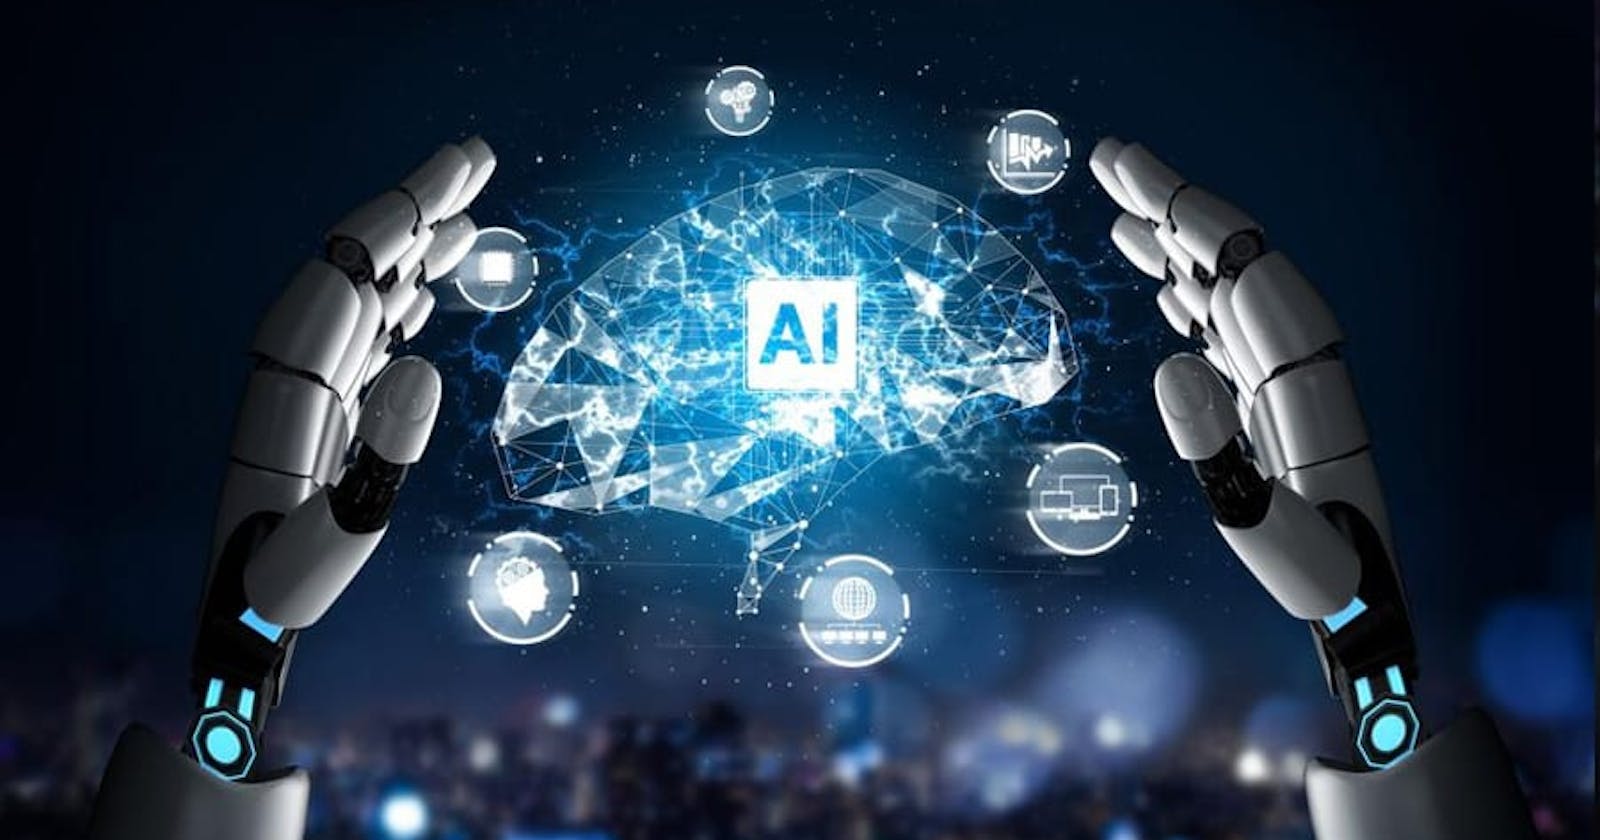 Top 10 AI in 2023 to make money 500$